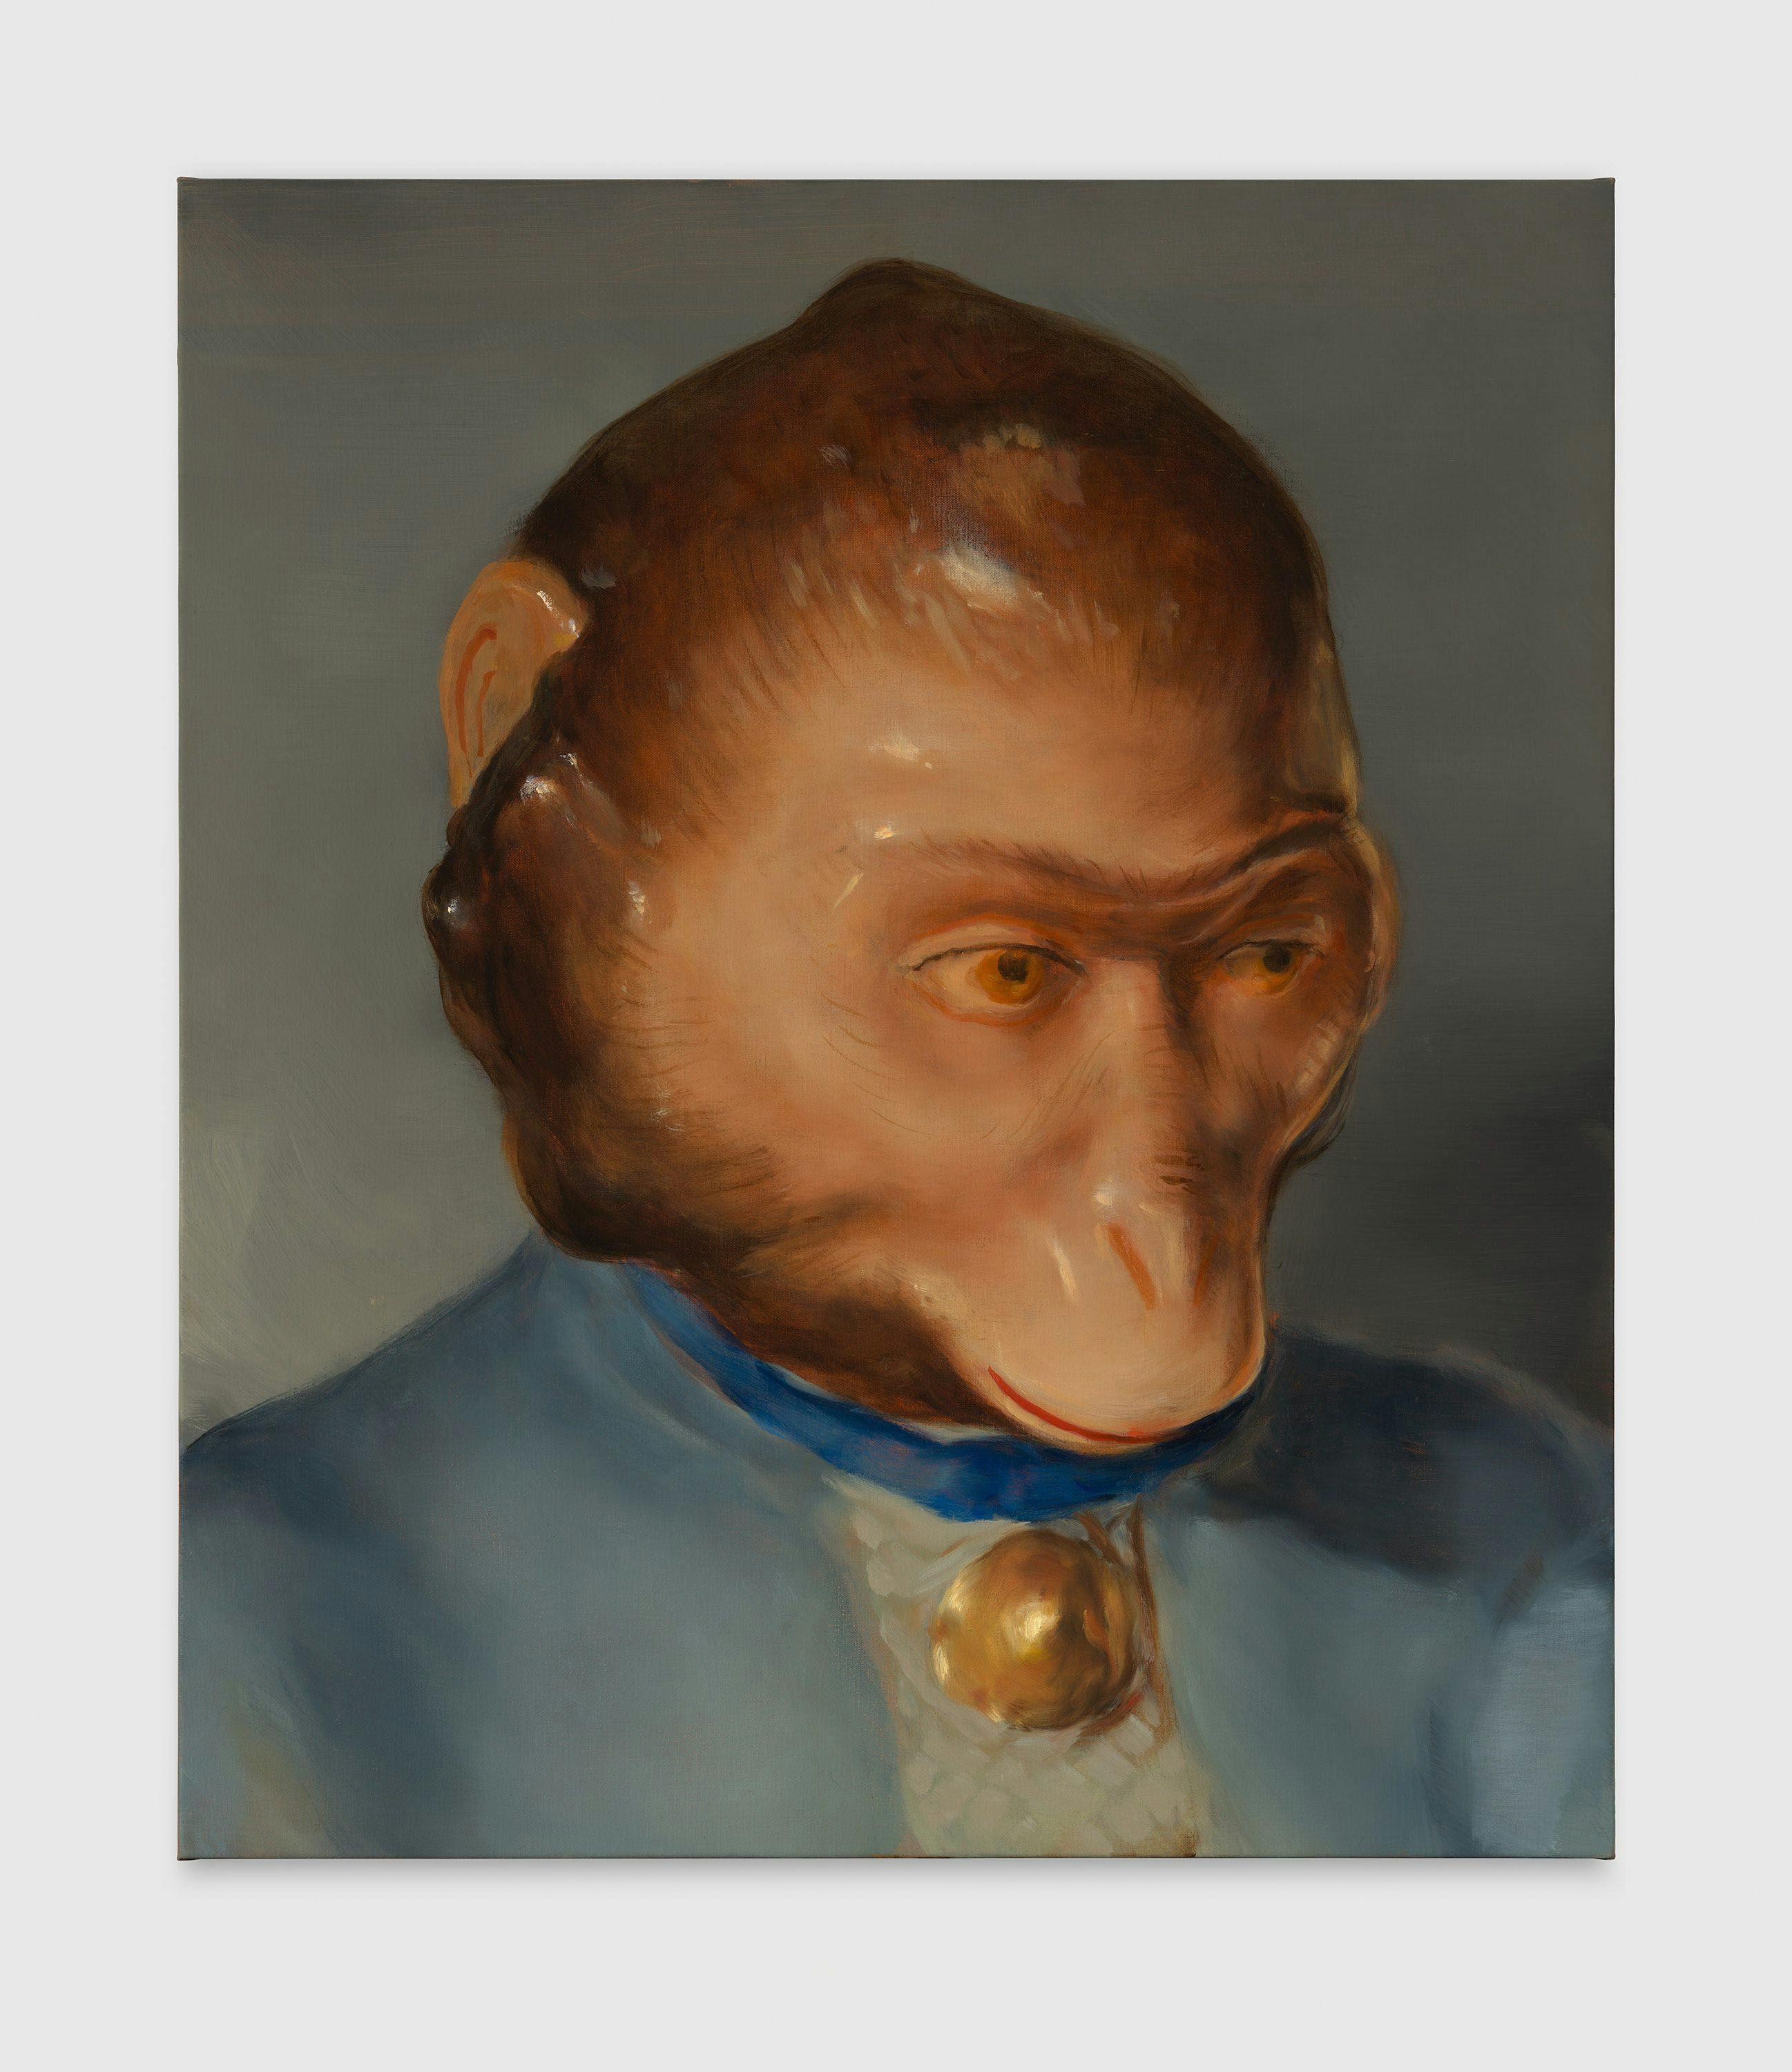 A painting by Michaël Borremans, titled The Monkey, dated 2023.